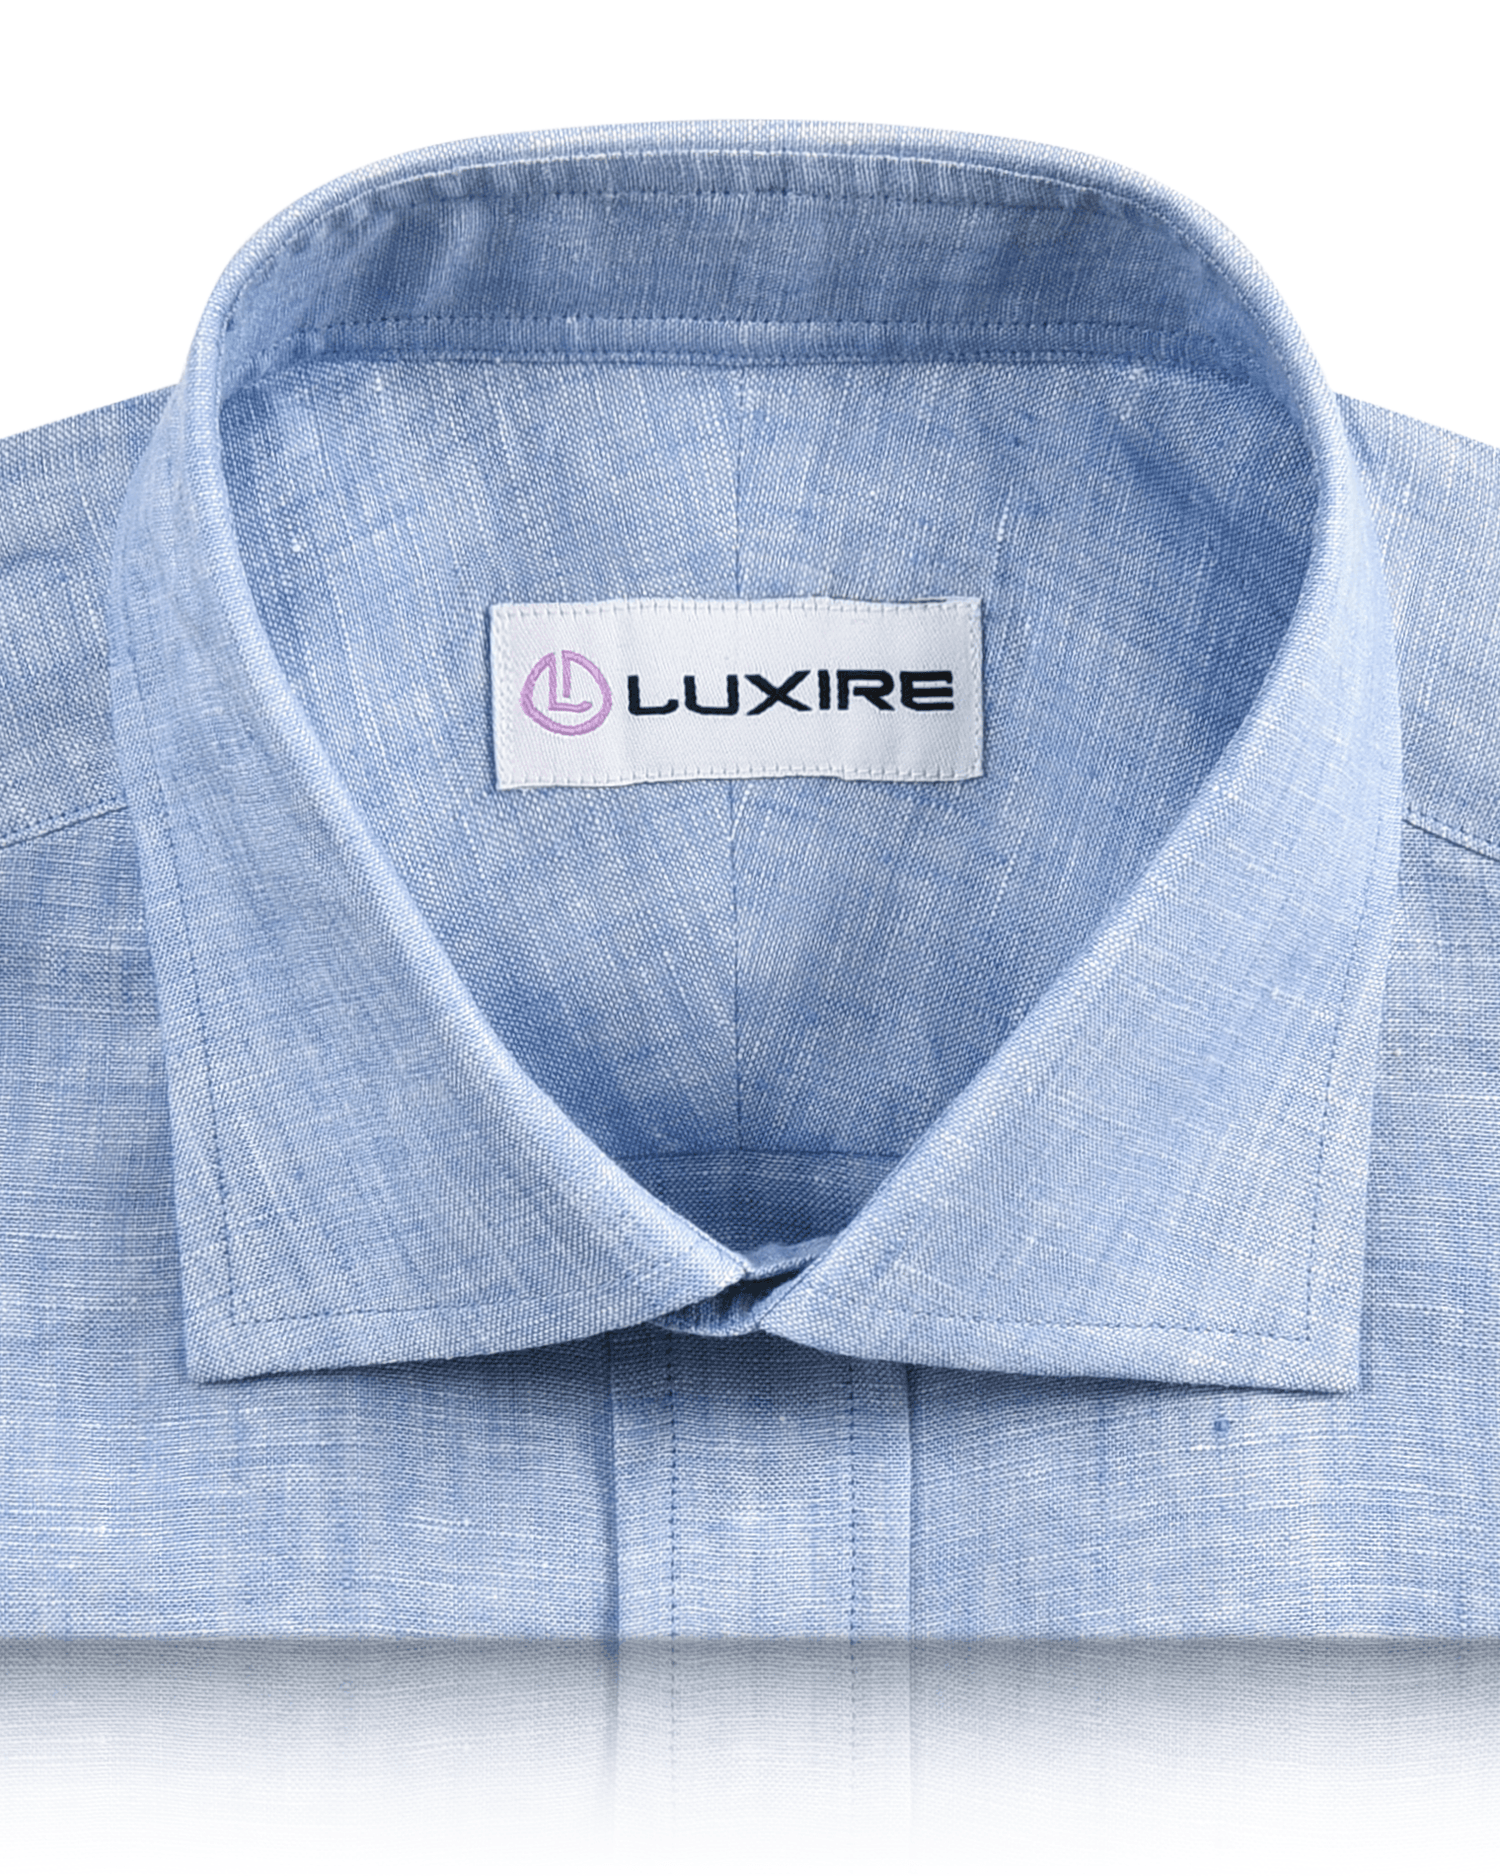 Collar of the custom linen shirt for men in light blue chambray by Luxire Clothing